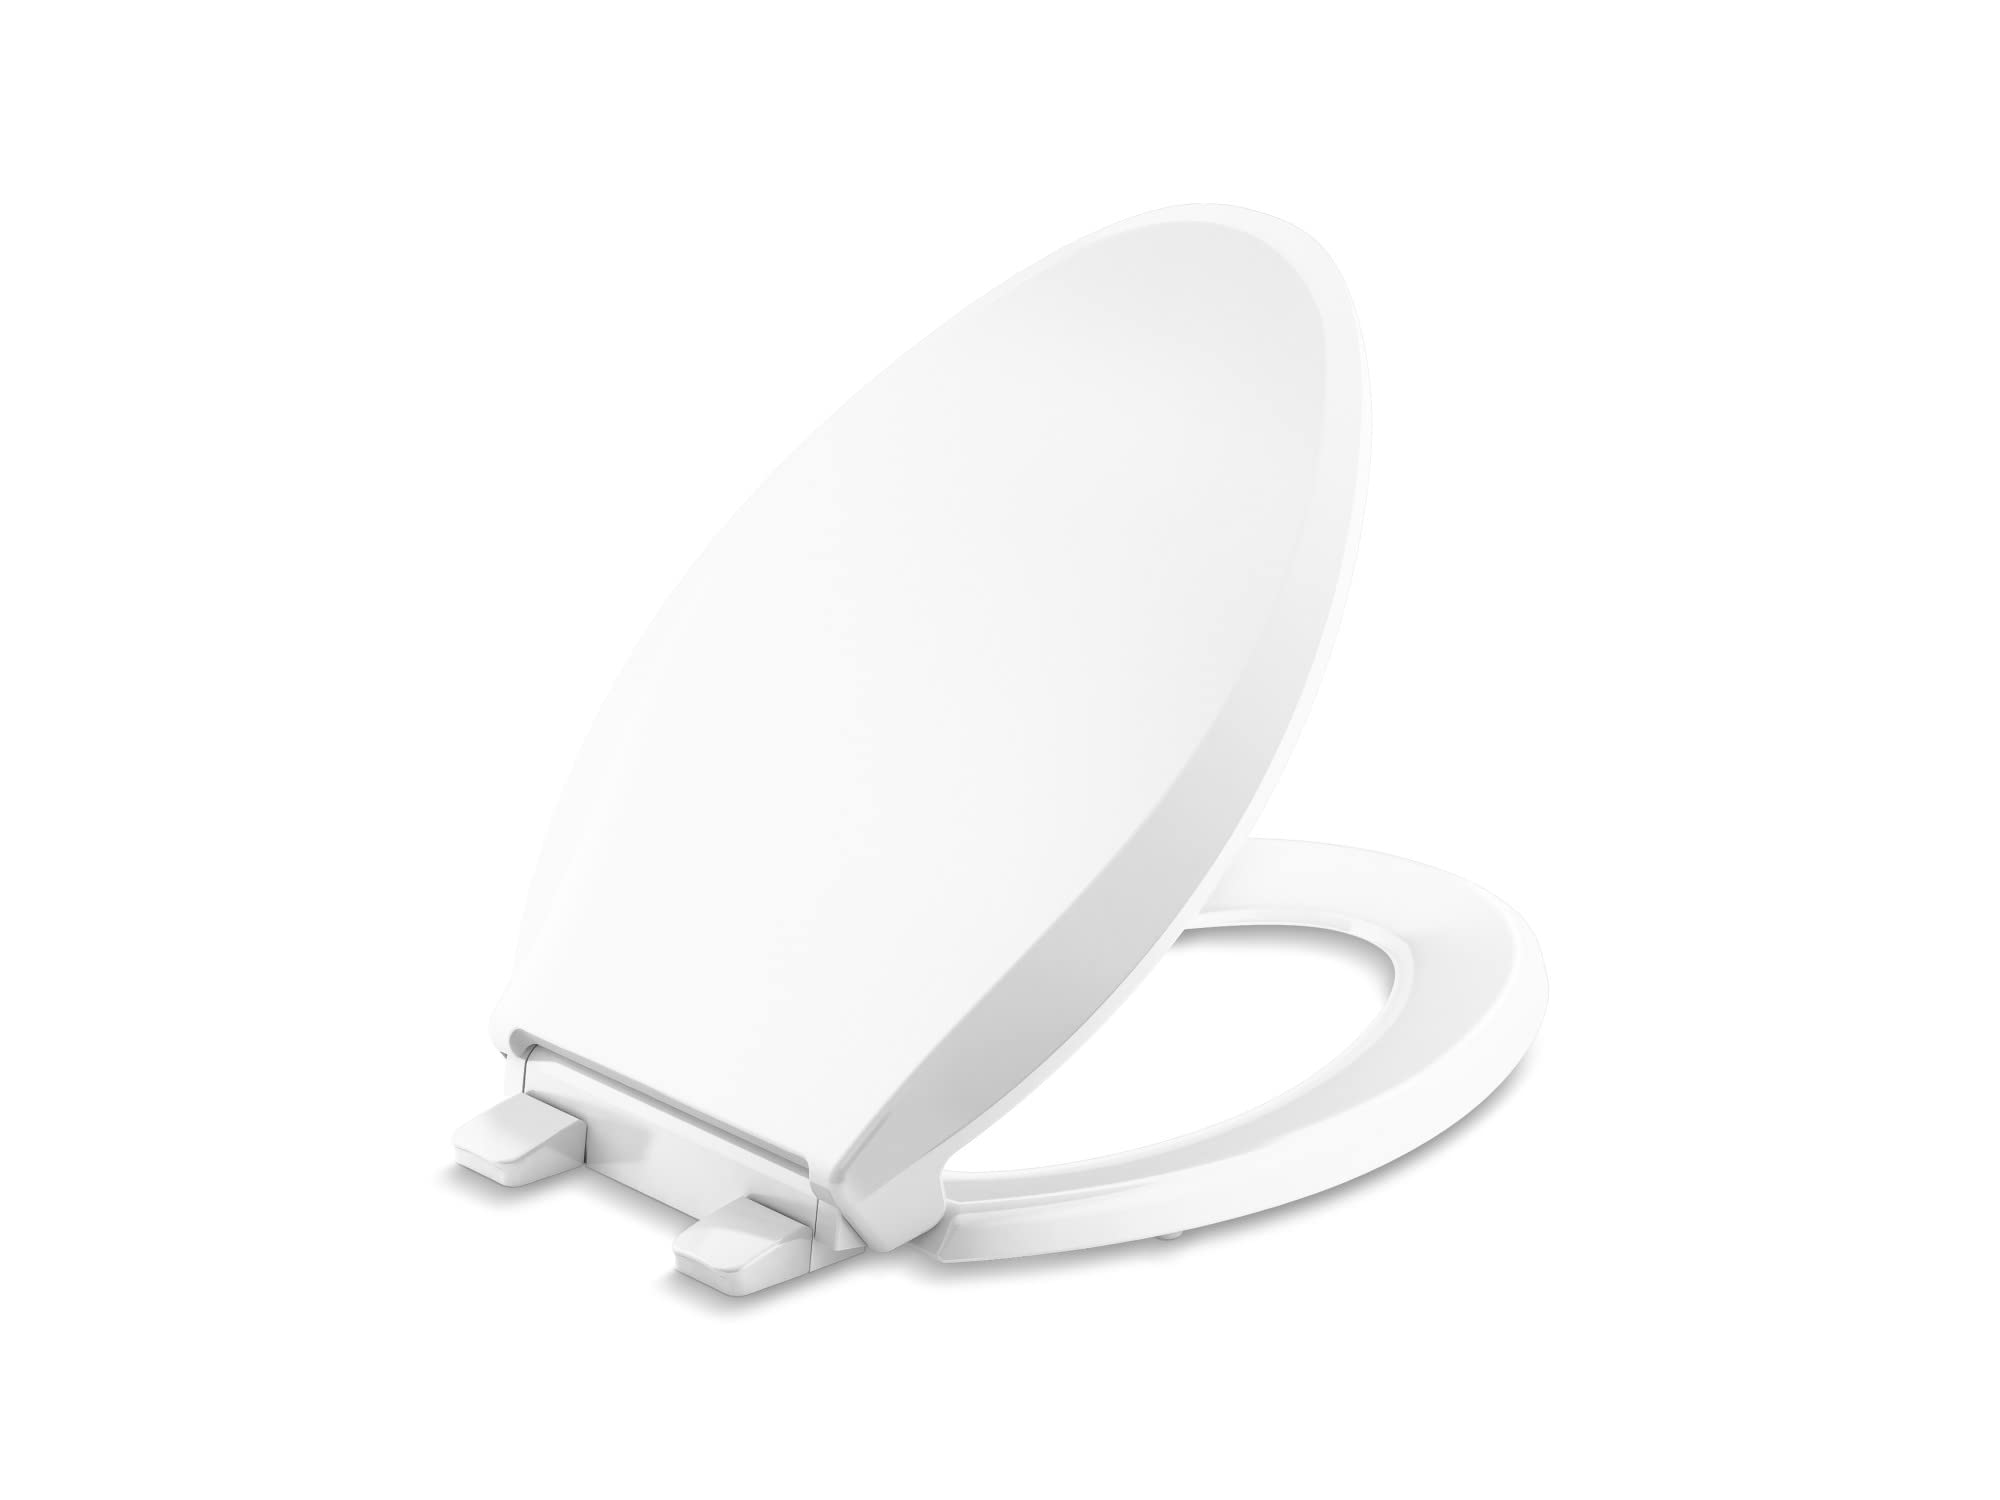 KOHLER 4636-RL-0 Cachet ReadyLatch Elongated Toilet Seat, Quiet-Close Lid and Seat, Countoured Seat, Grip-Tight Bumpers and Installation Hardware, White